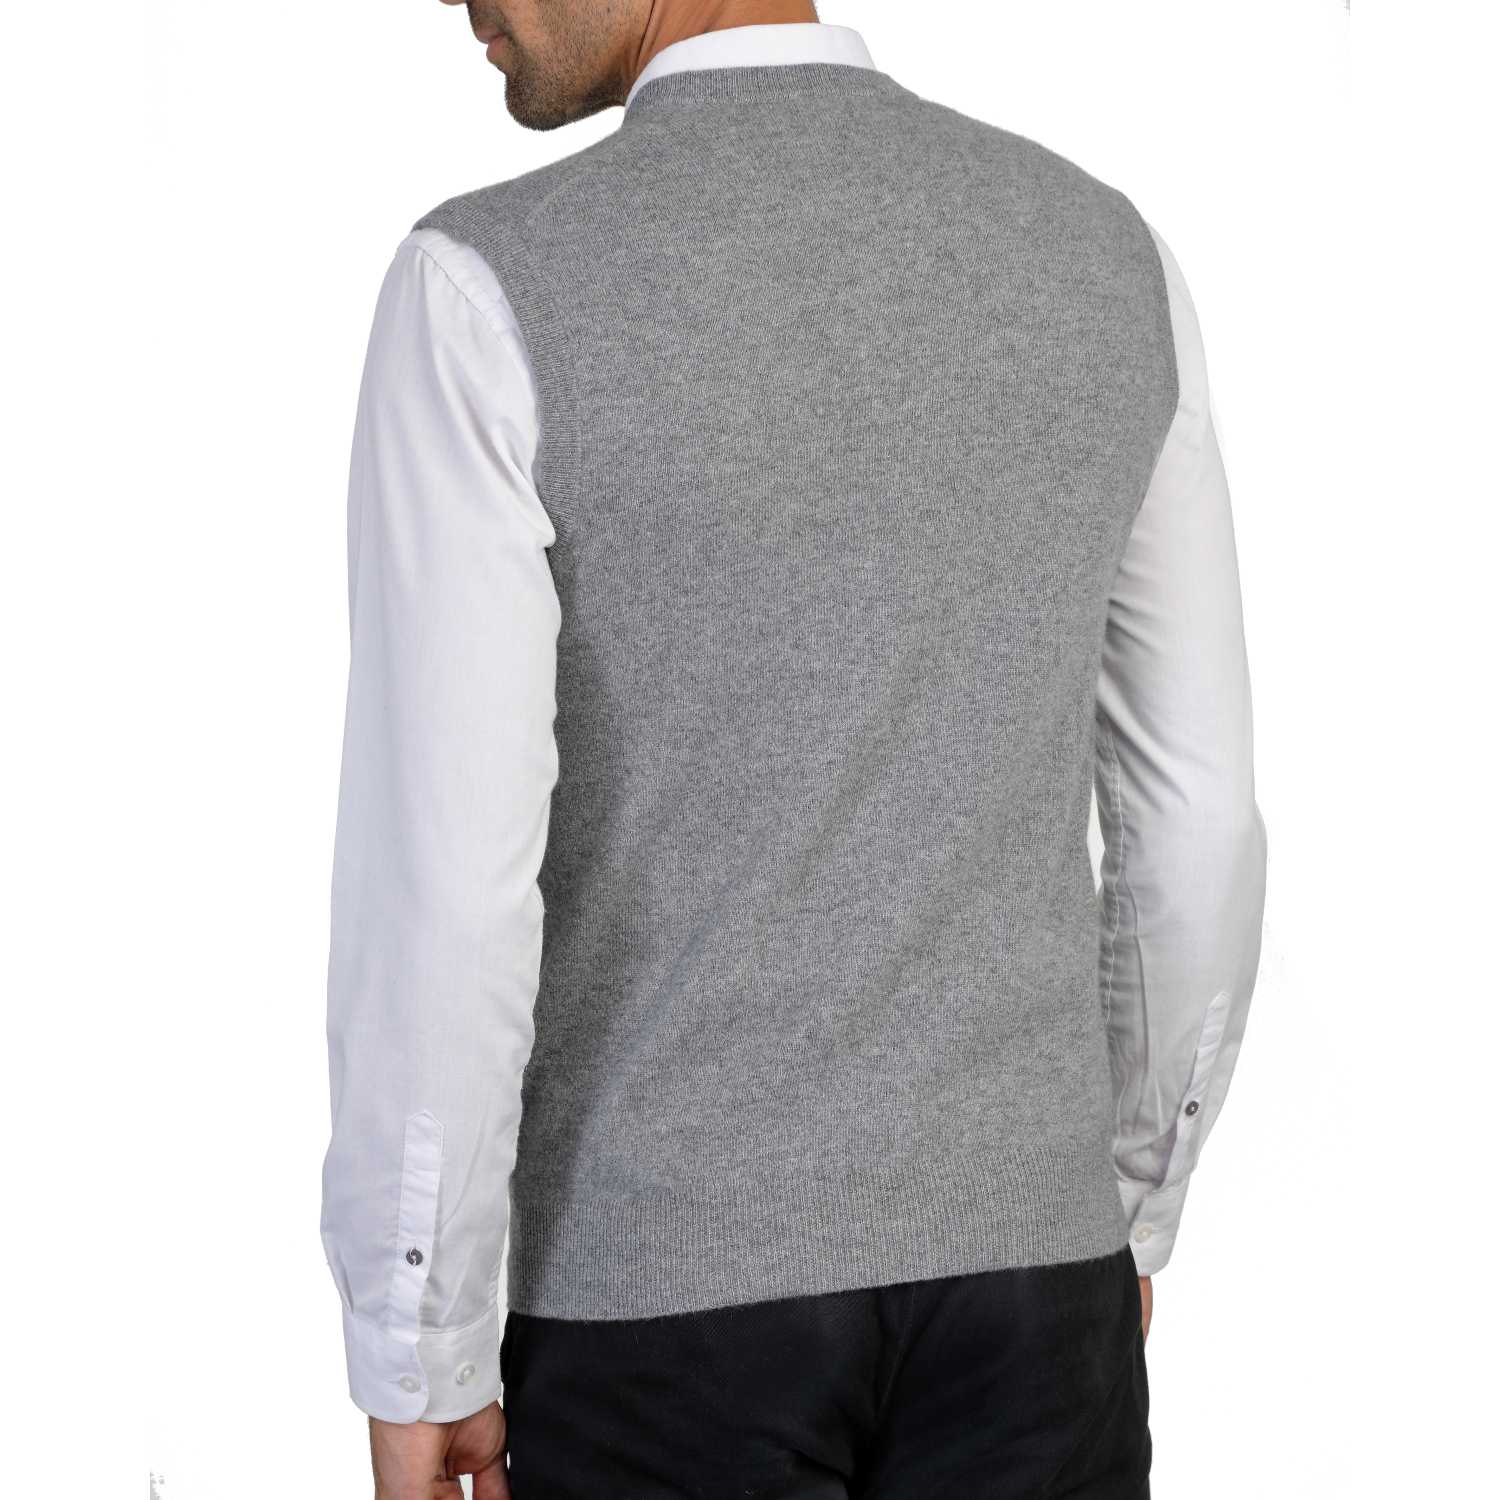 Mens Grey Cashmere Sleeveless Vest Sweater | Back | Shop at The Cashmere Choice | London